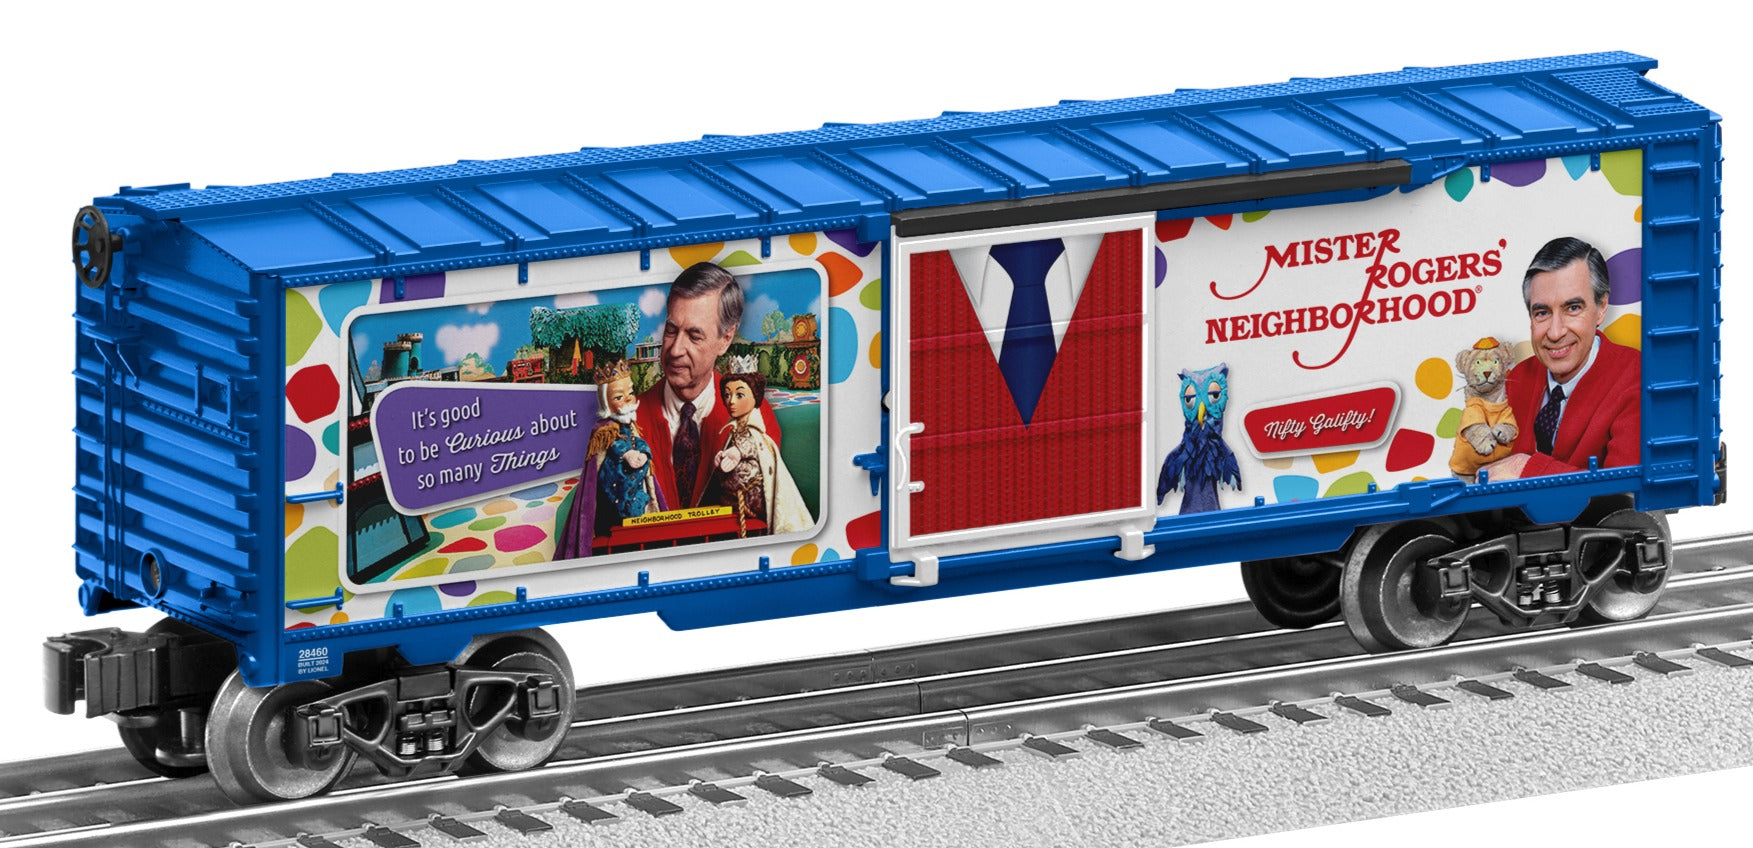 Lionel 2428460 - Mister Rogers' Neighborhood - Sound Boxcar "Mister Rogers"